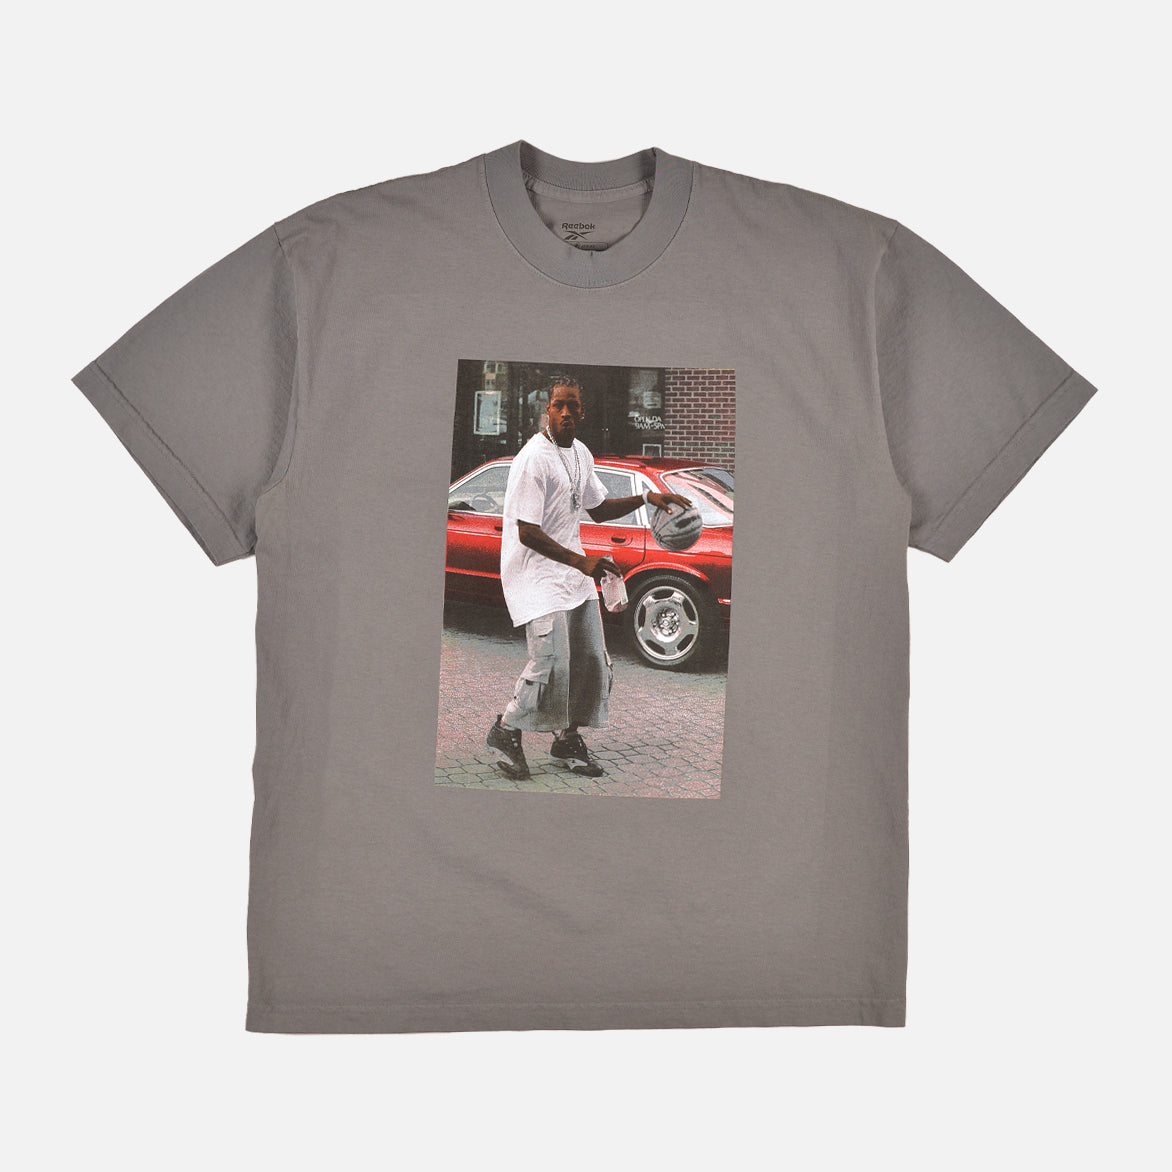 ALLEN IVERSON "BALL IN TEE CHARCOAL |